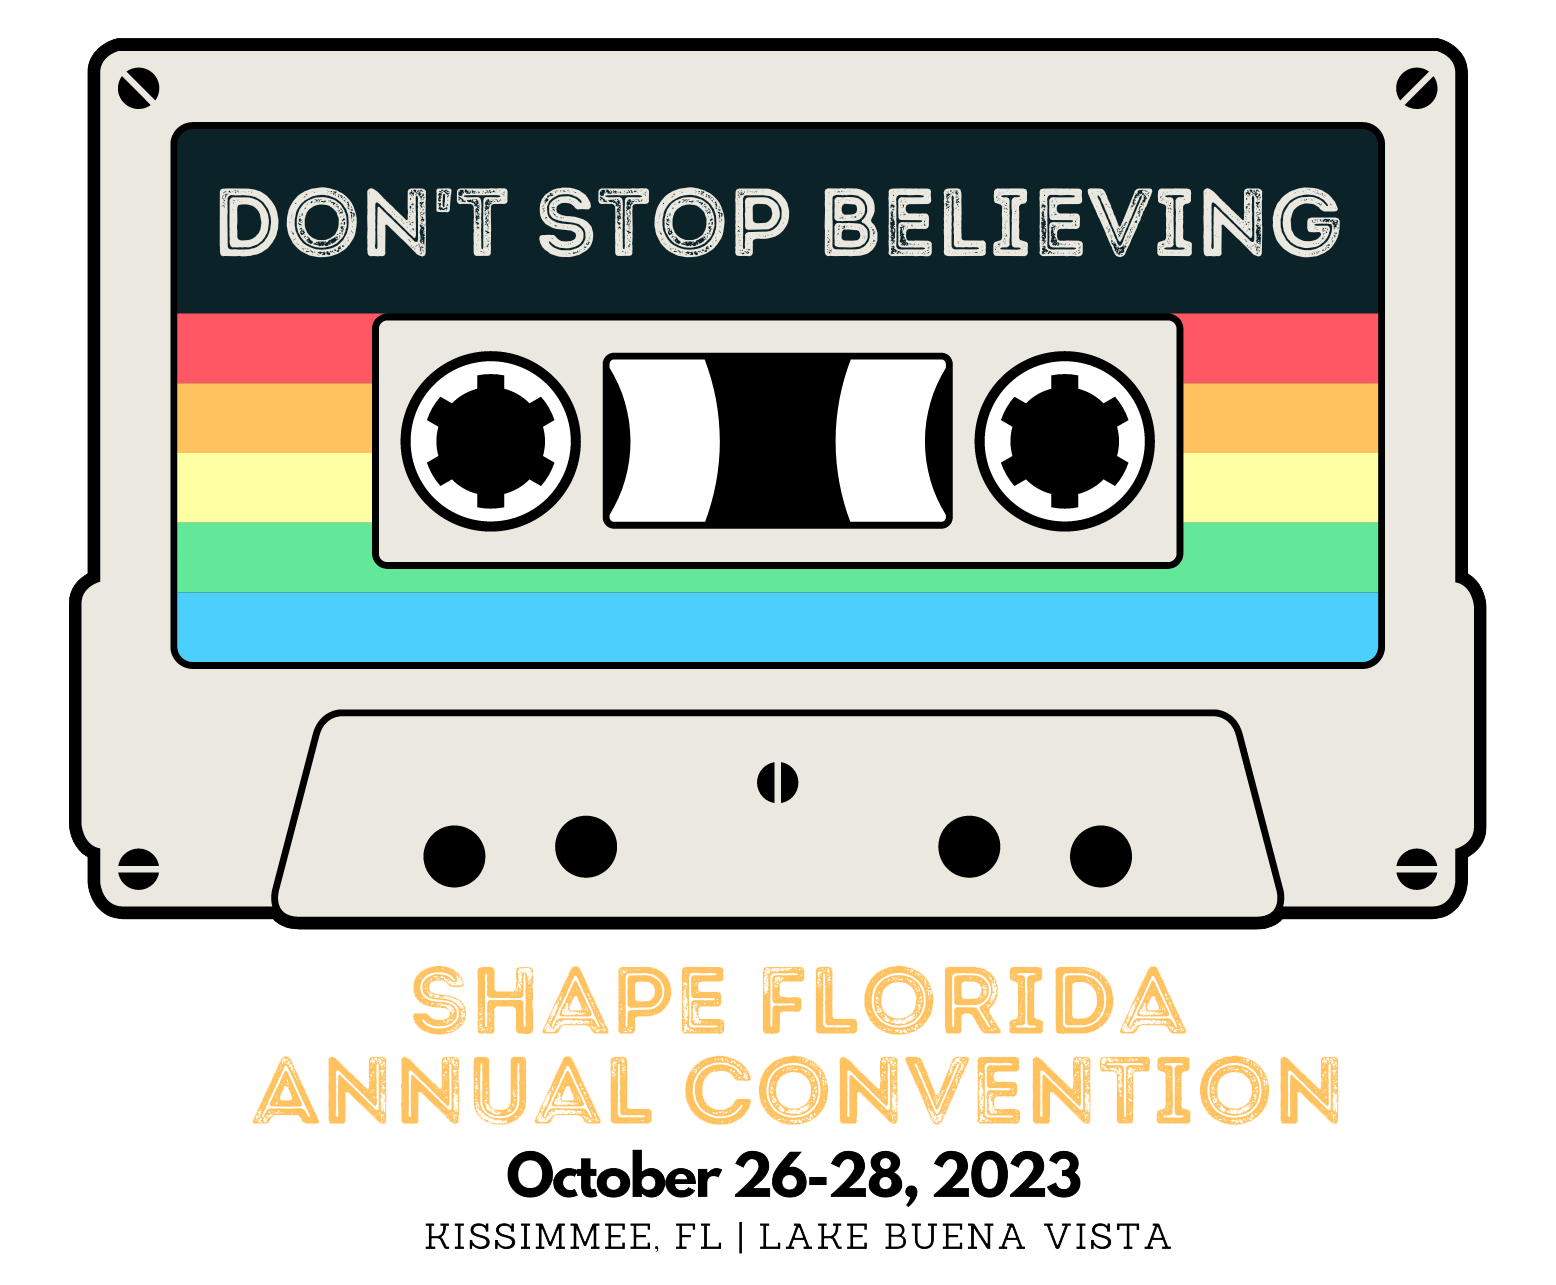 2023 SHAPE FLORIDA ANNUAL CONVENTION – “DON’T STOP BELIEVING”